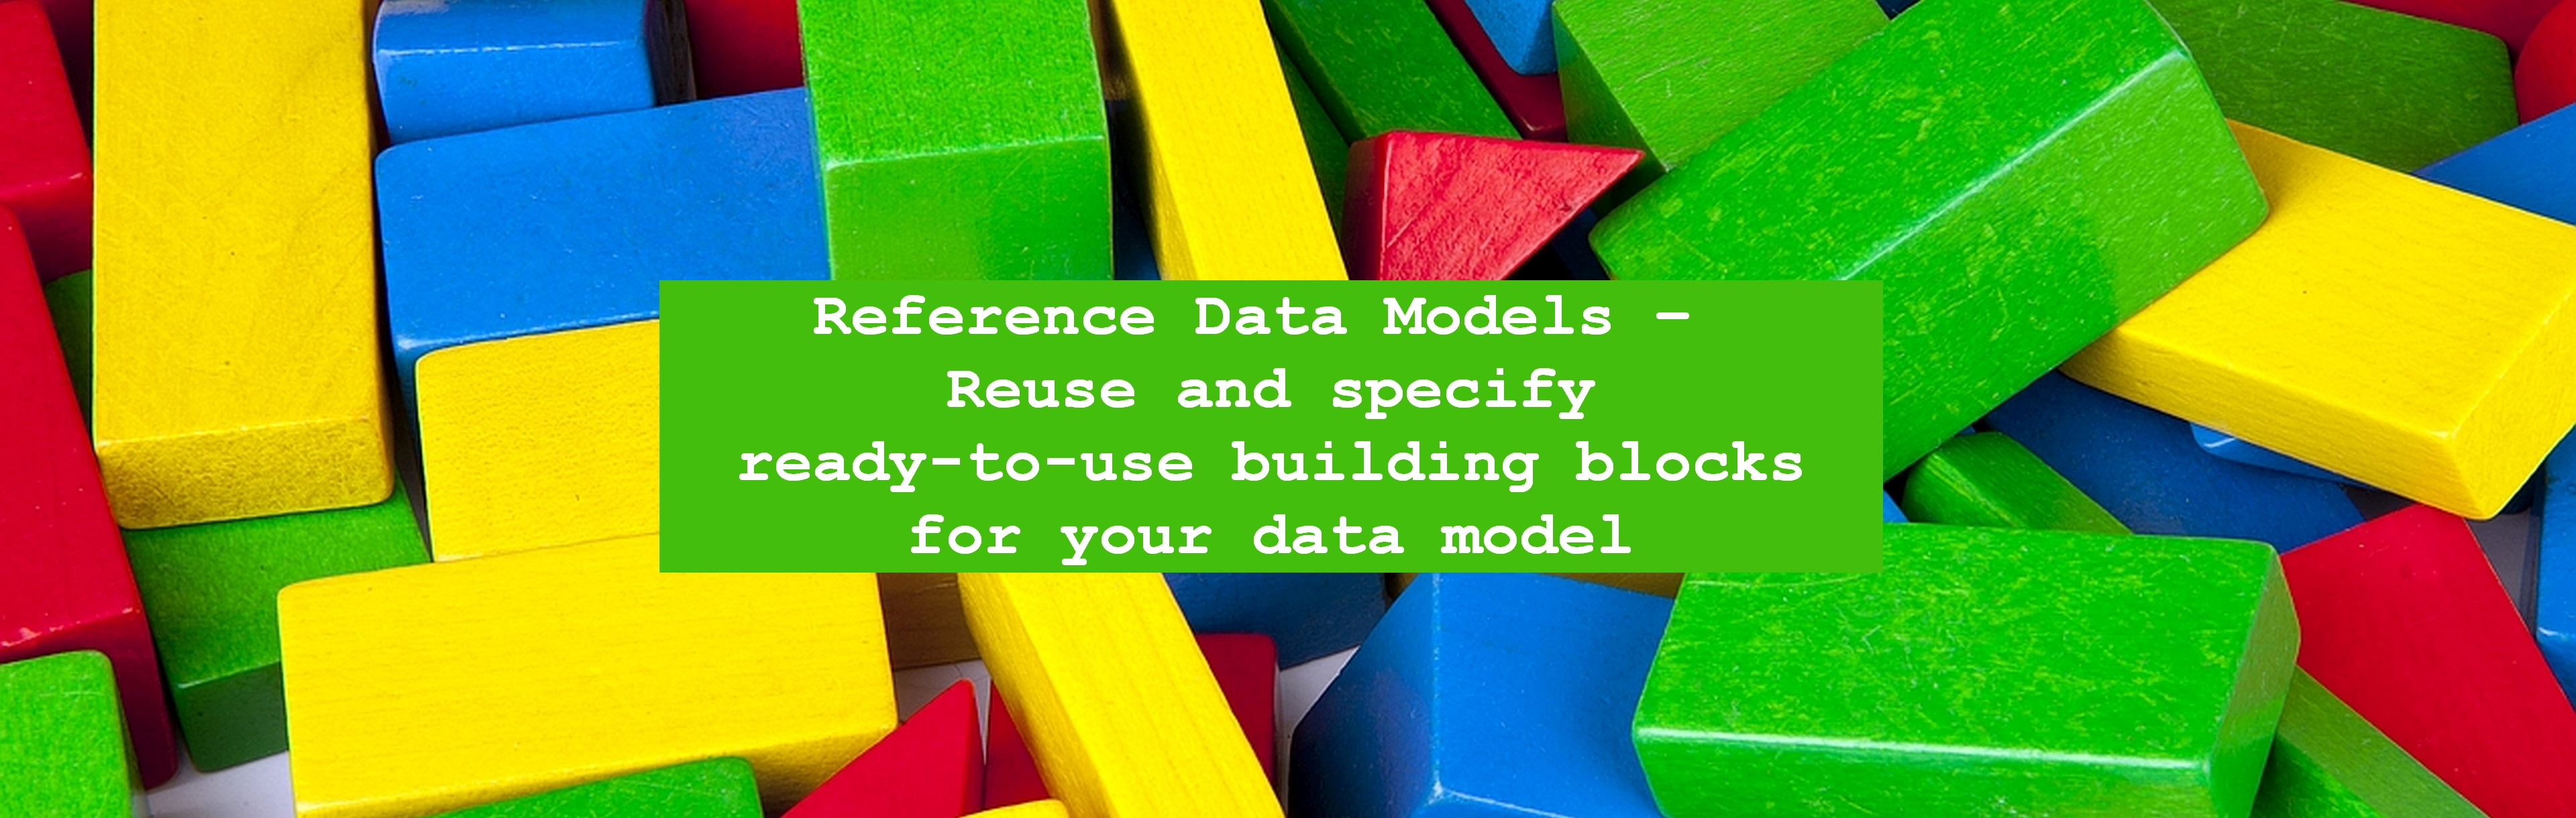 The picture shows the text "Reference Data Models - Reuse and specify ready-to-use building blocks for your data model" in a green box in front of colourful wooden building blocks.